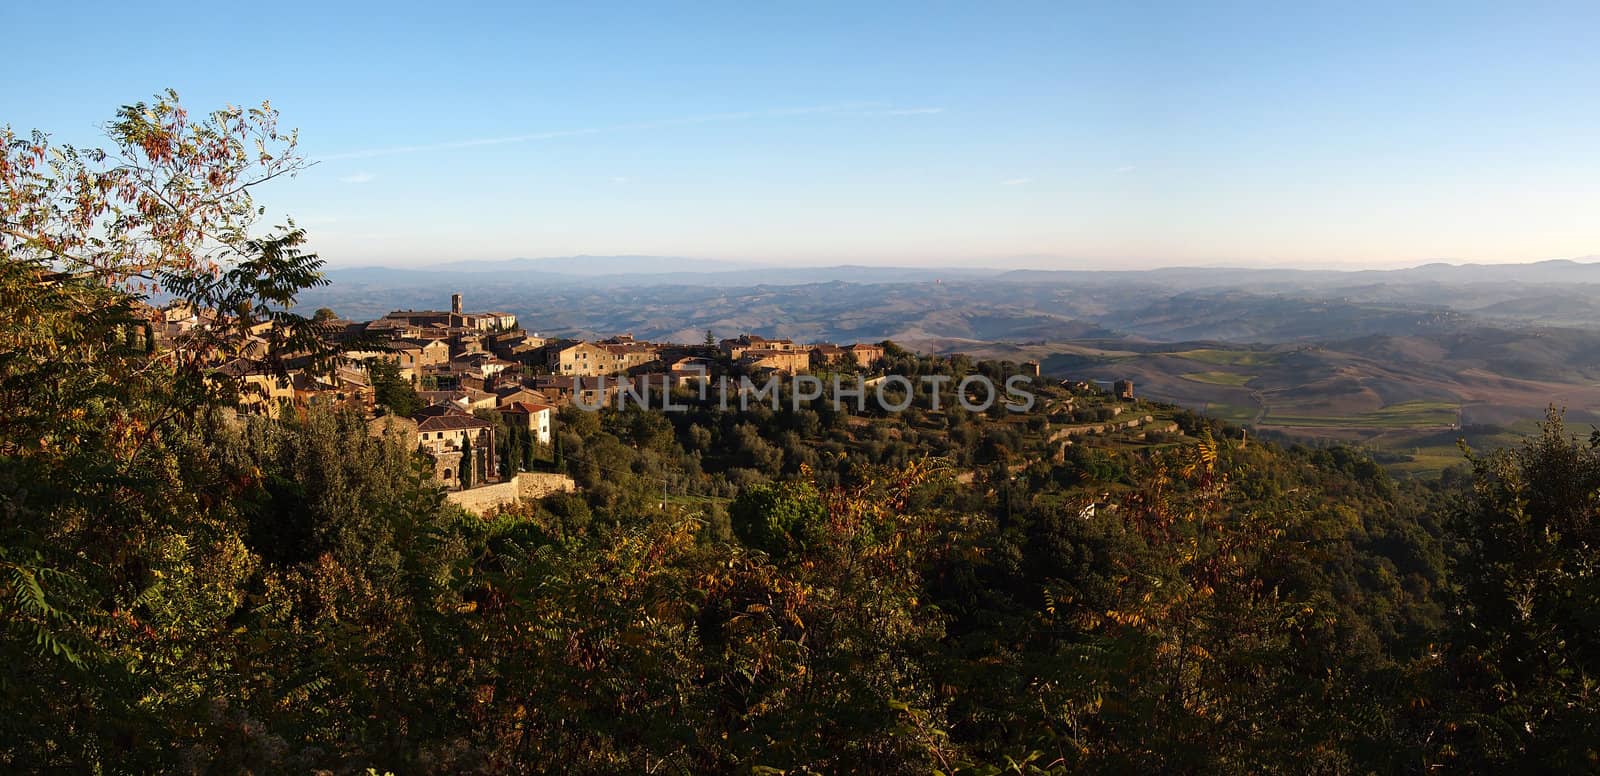 Hilltop town overlooking the Val d�Orcia in Tuscany, Italy.